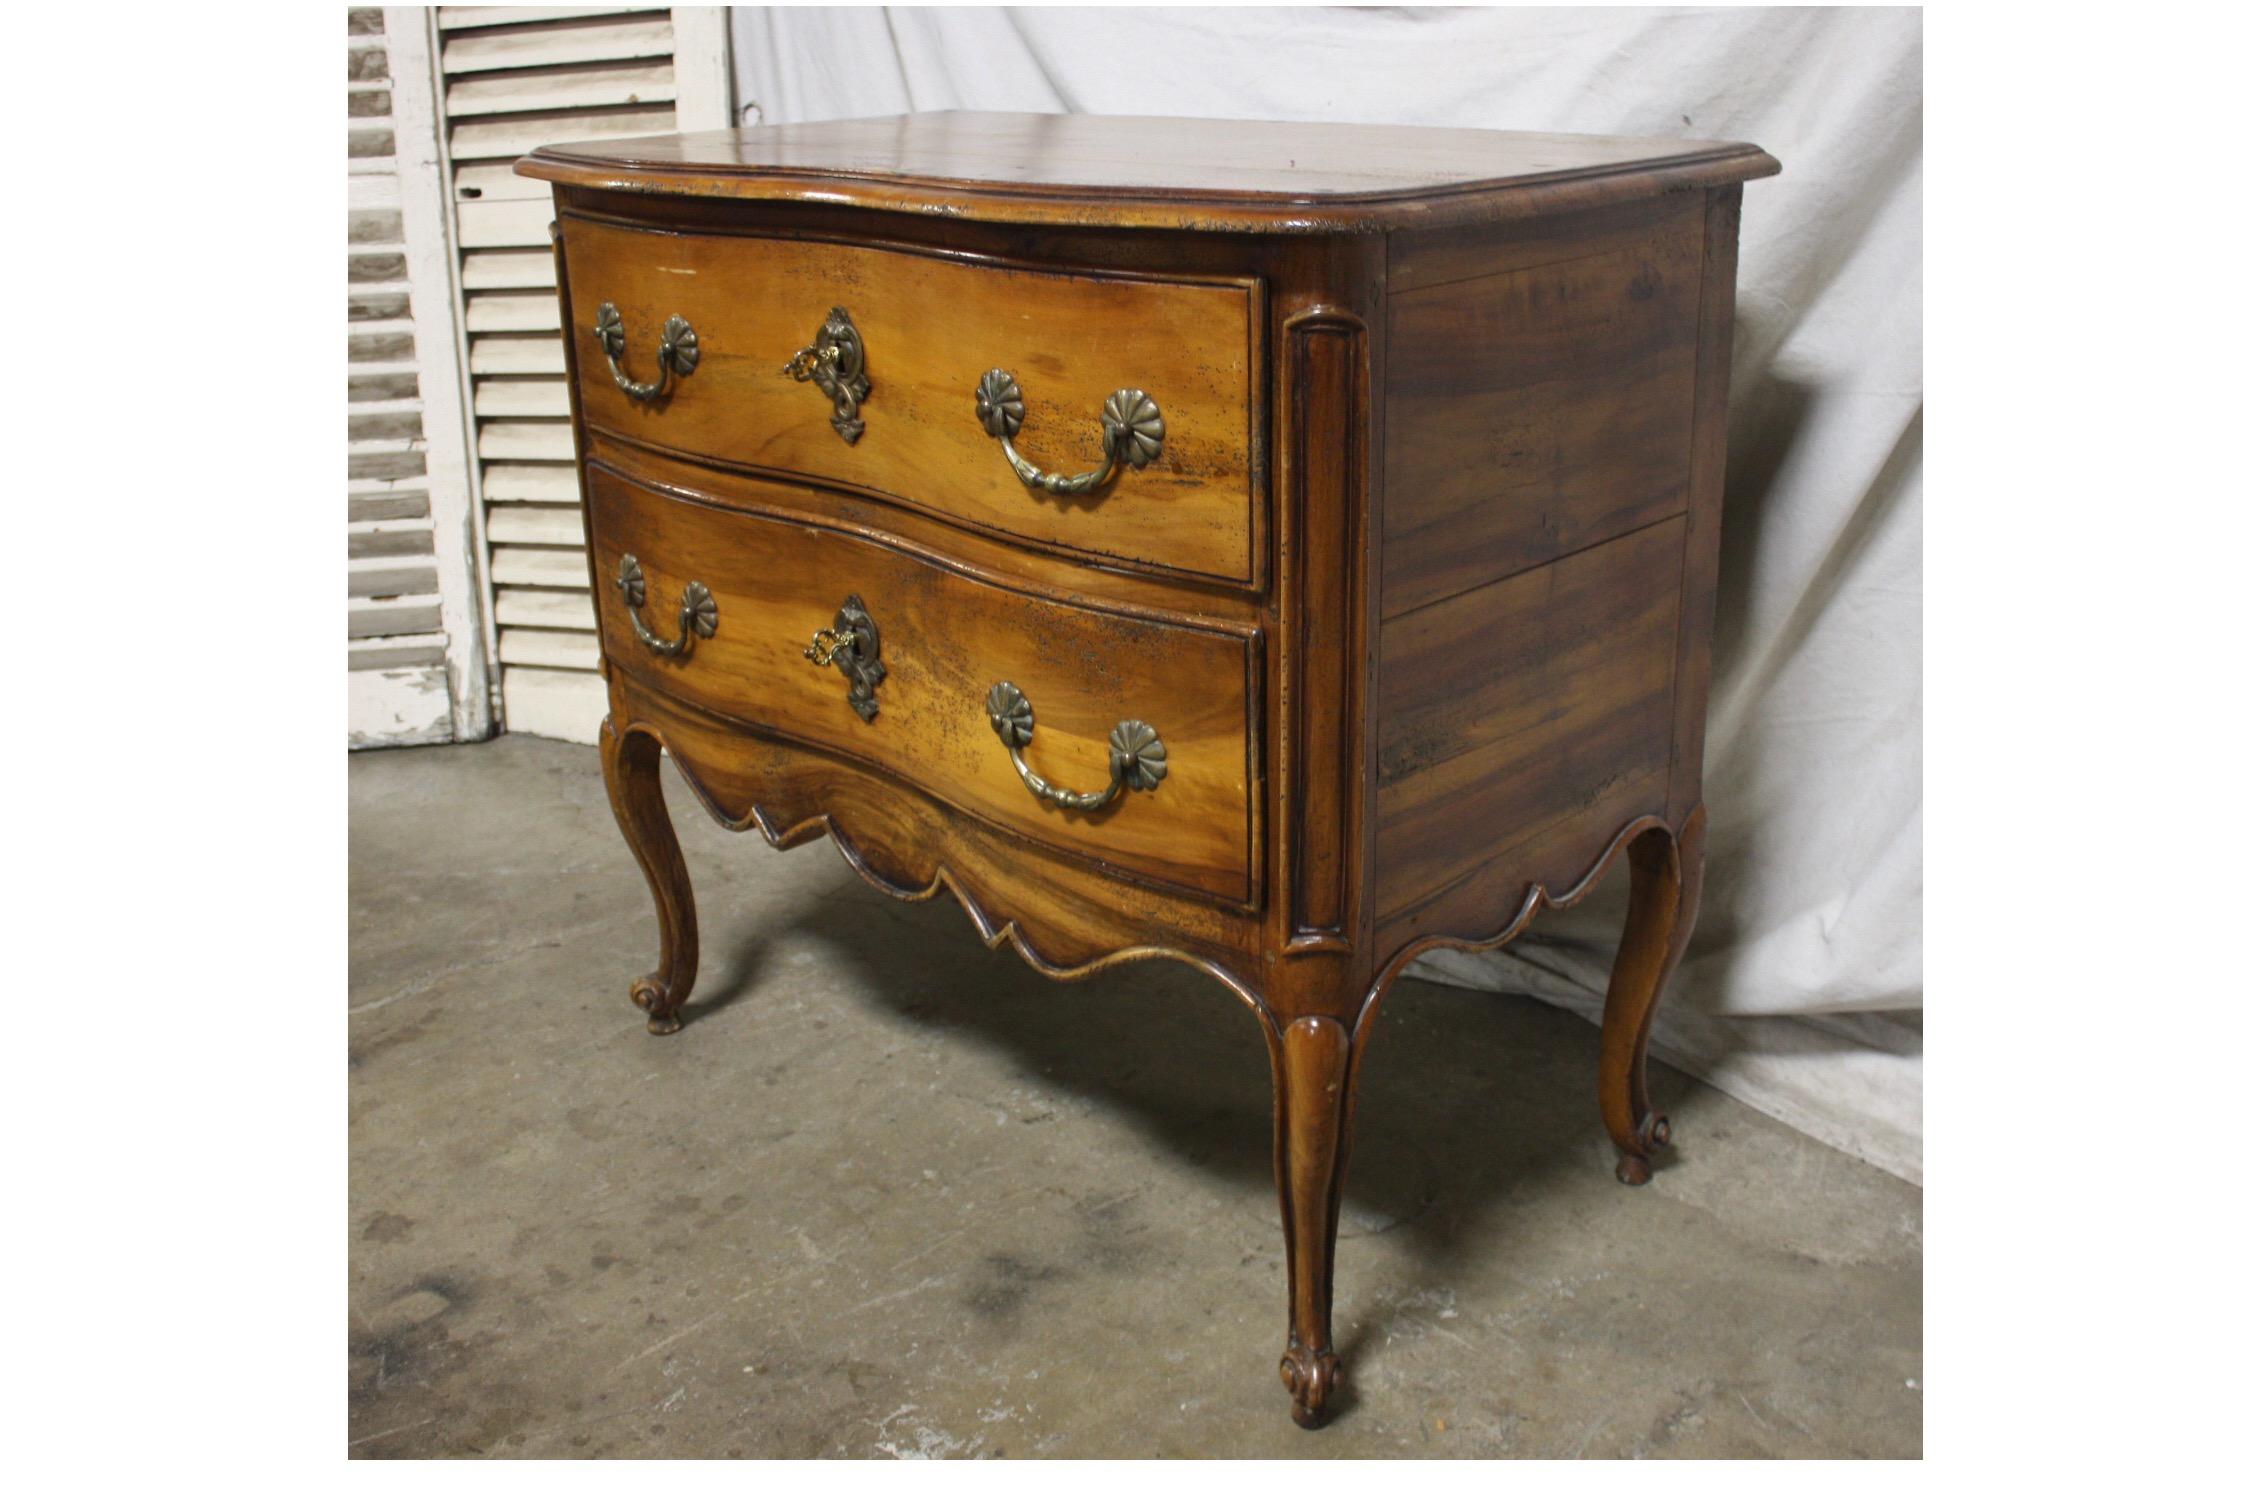 19th century French commode.